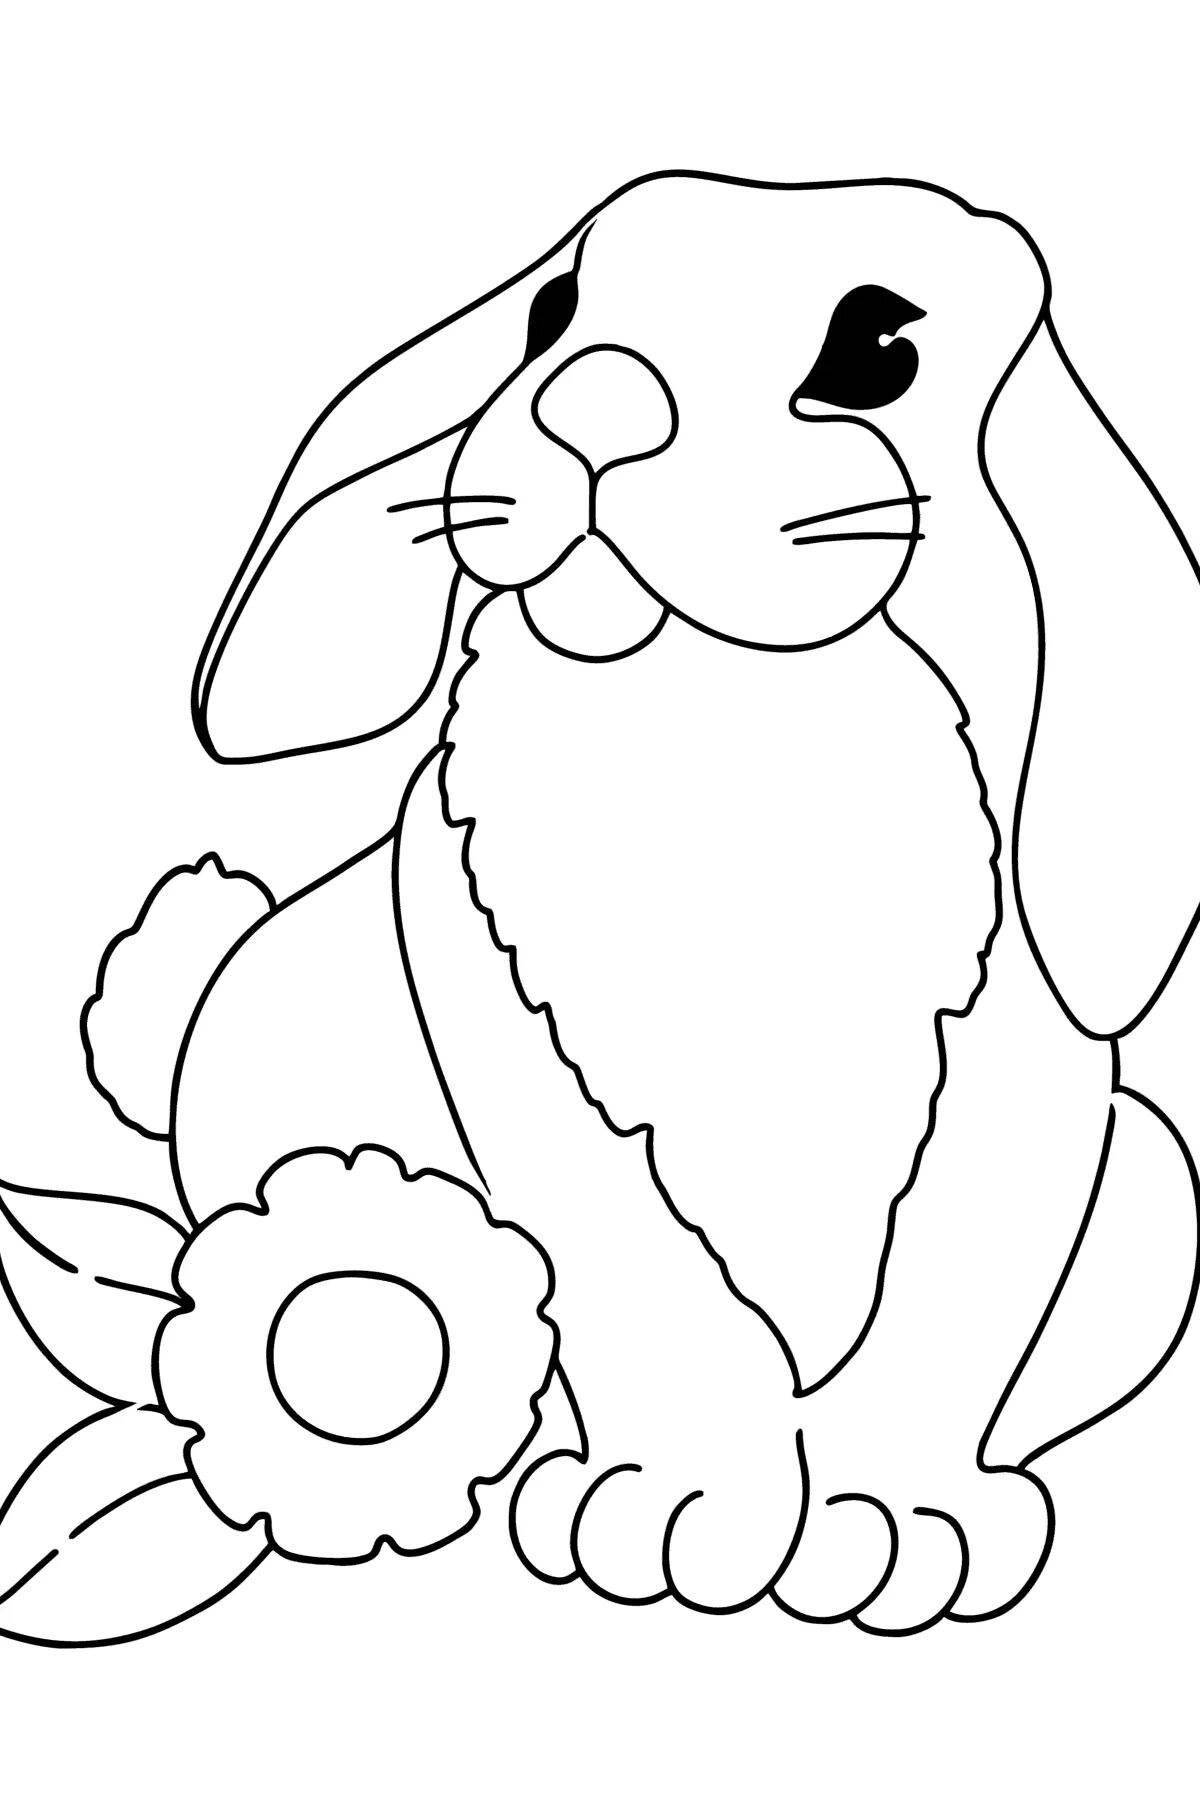 Exquisite rabbit coloring book for 2 year olds